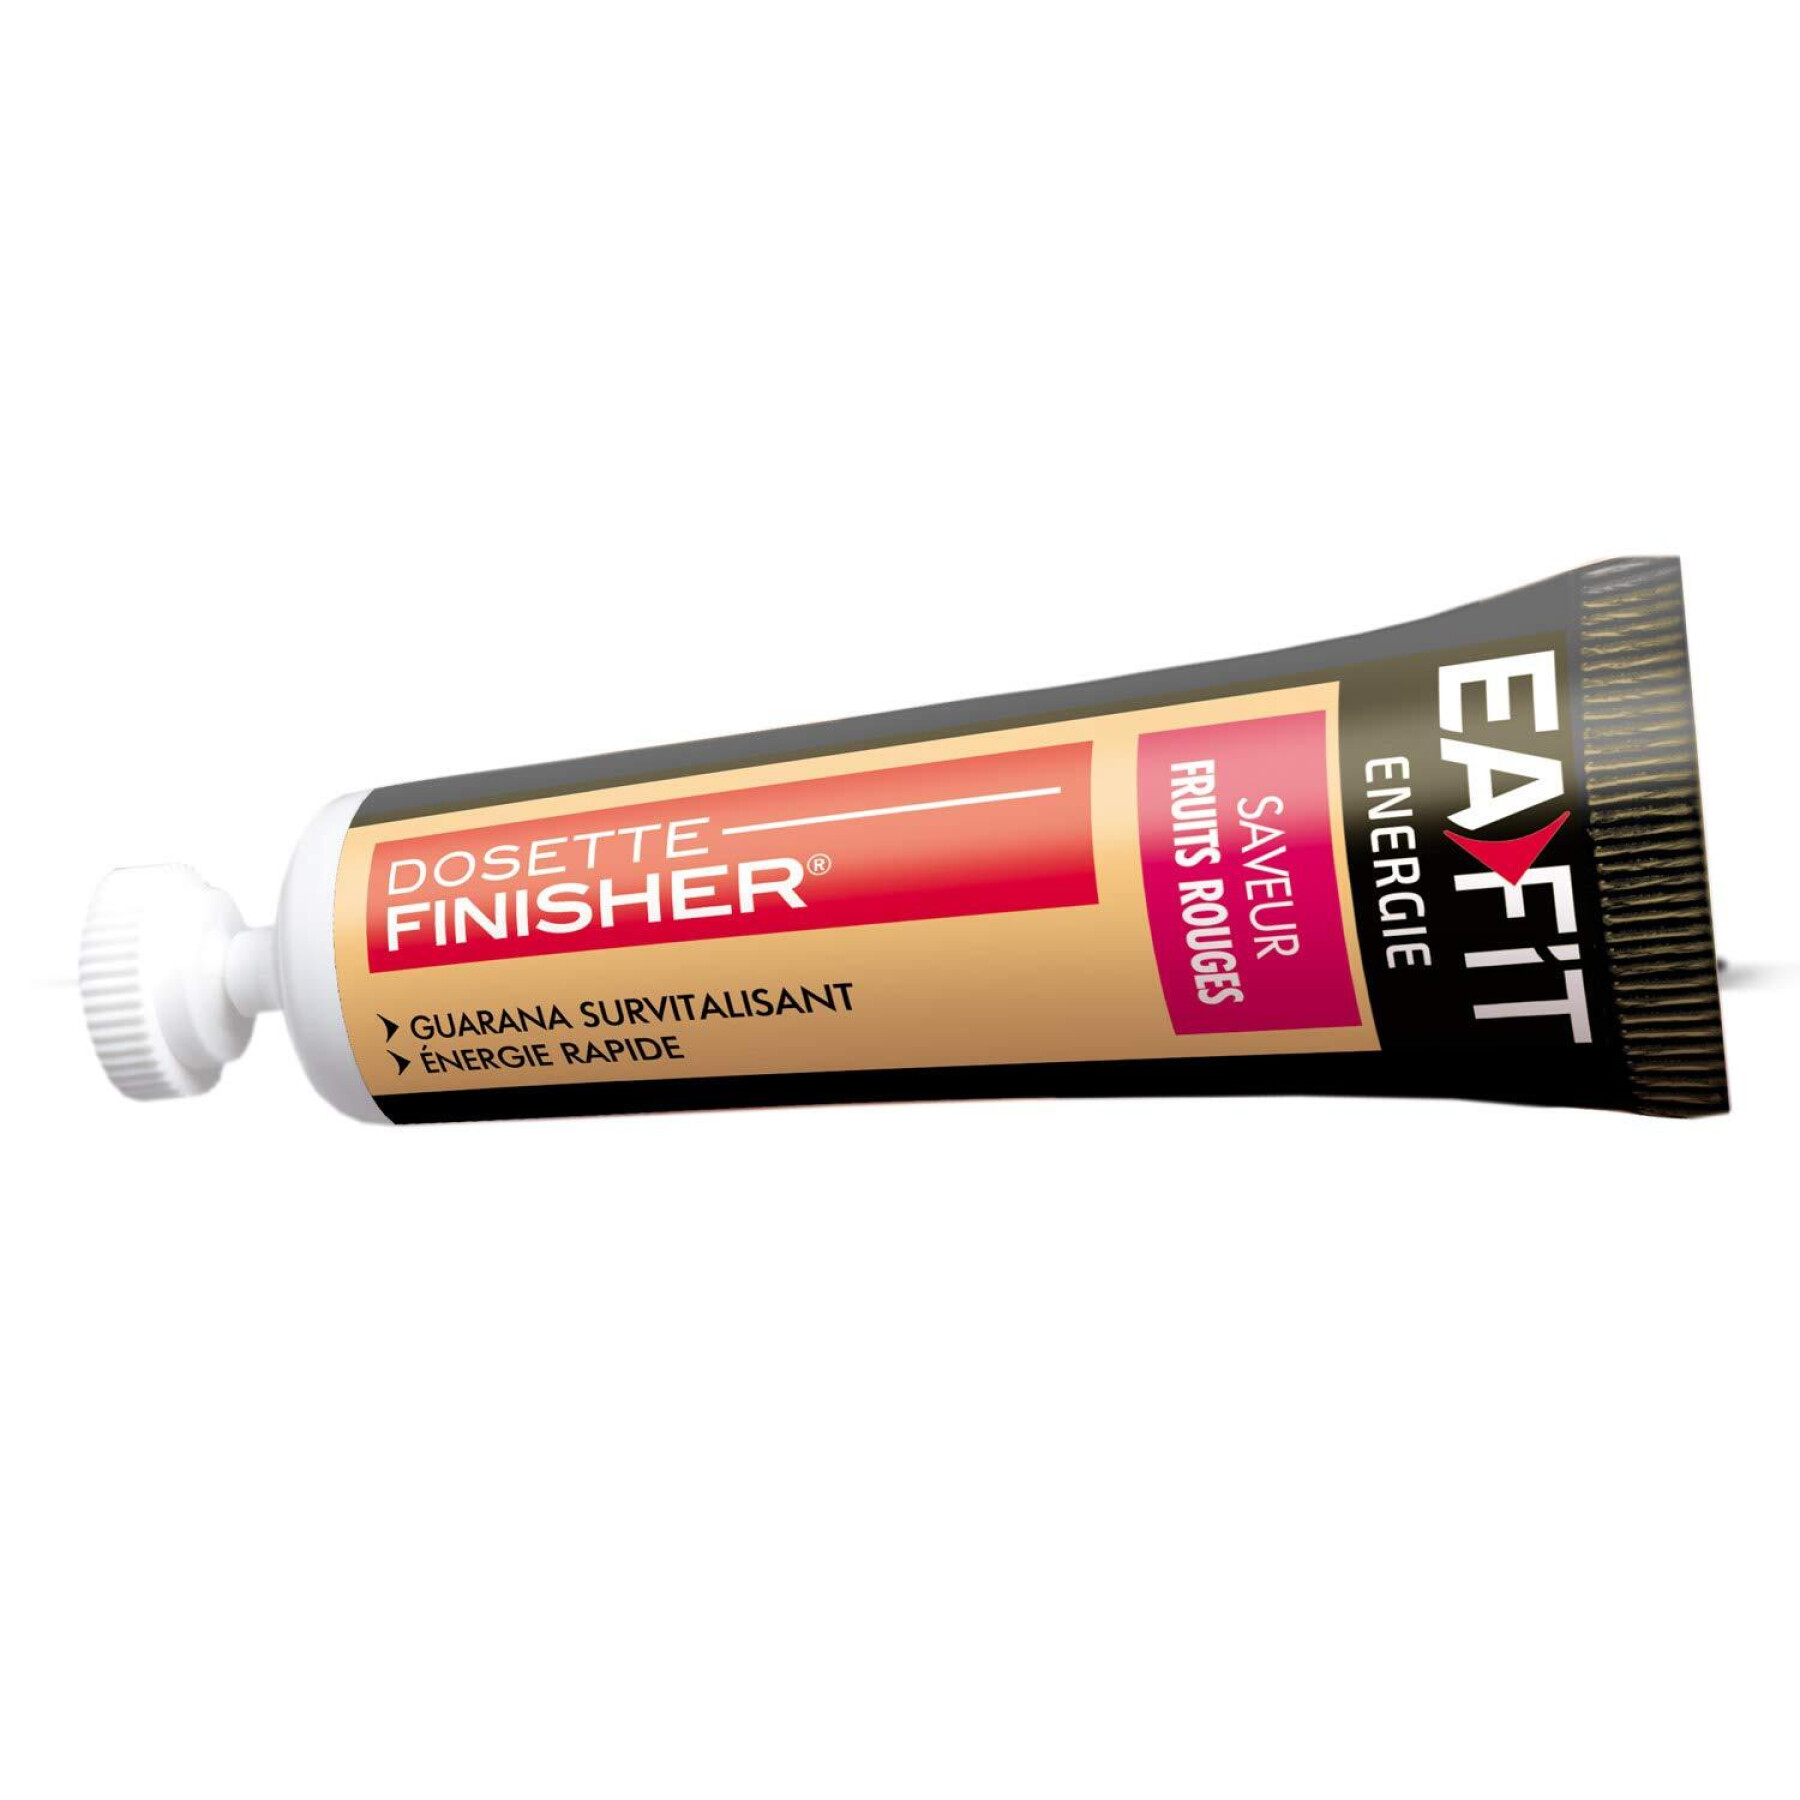 Finisher rote Früchte EA Fit (50x25g)